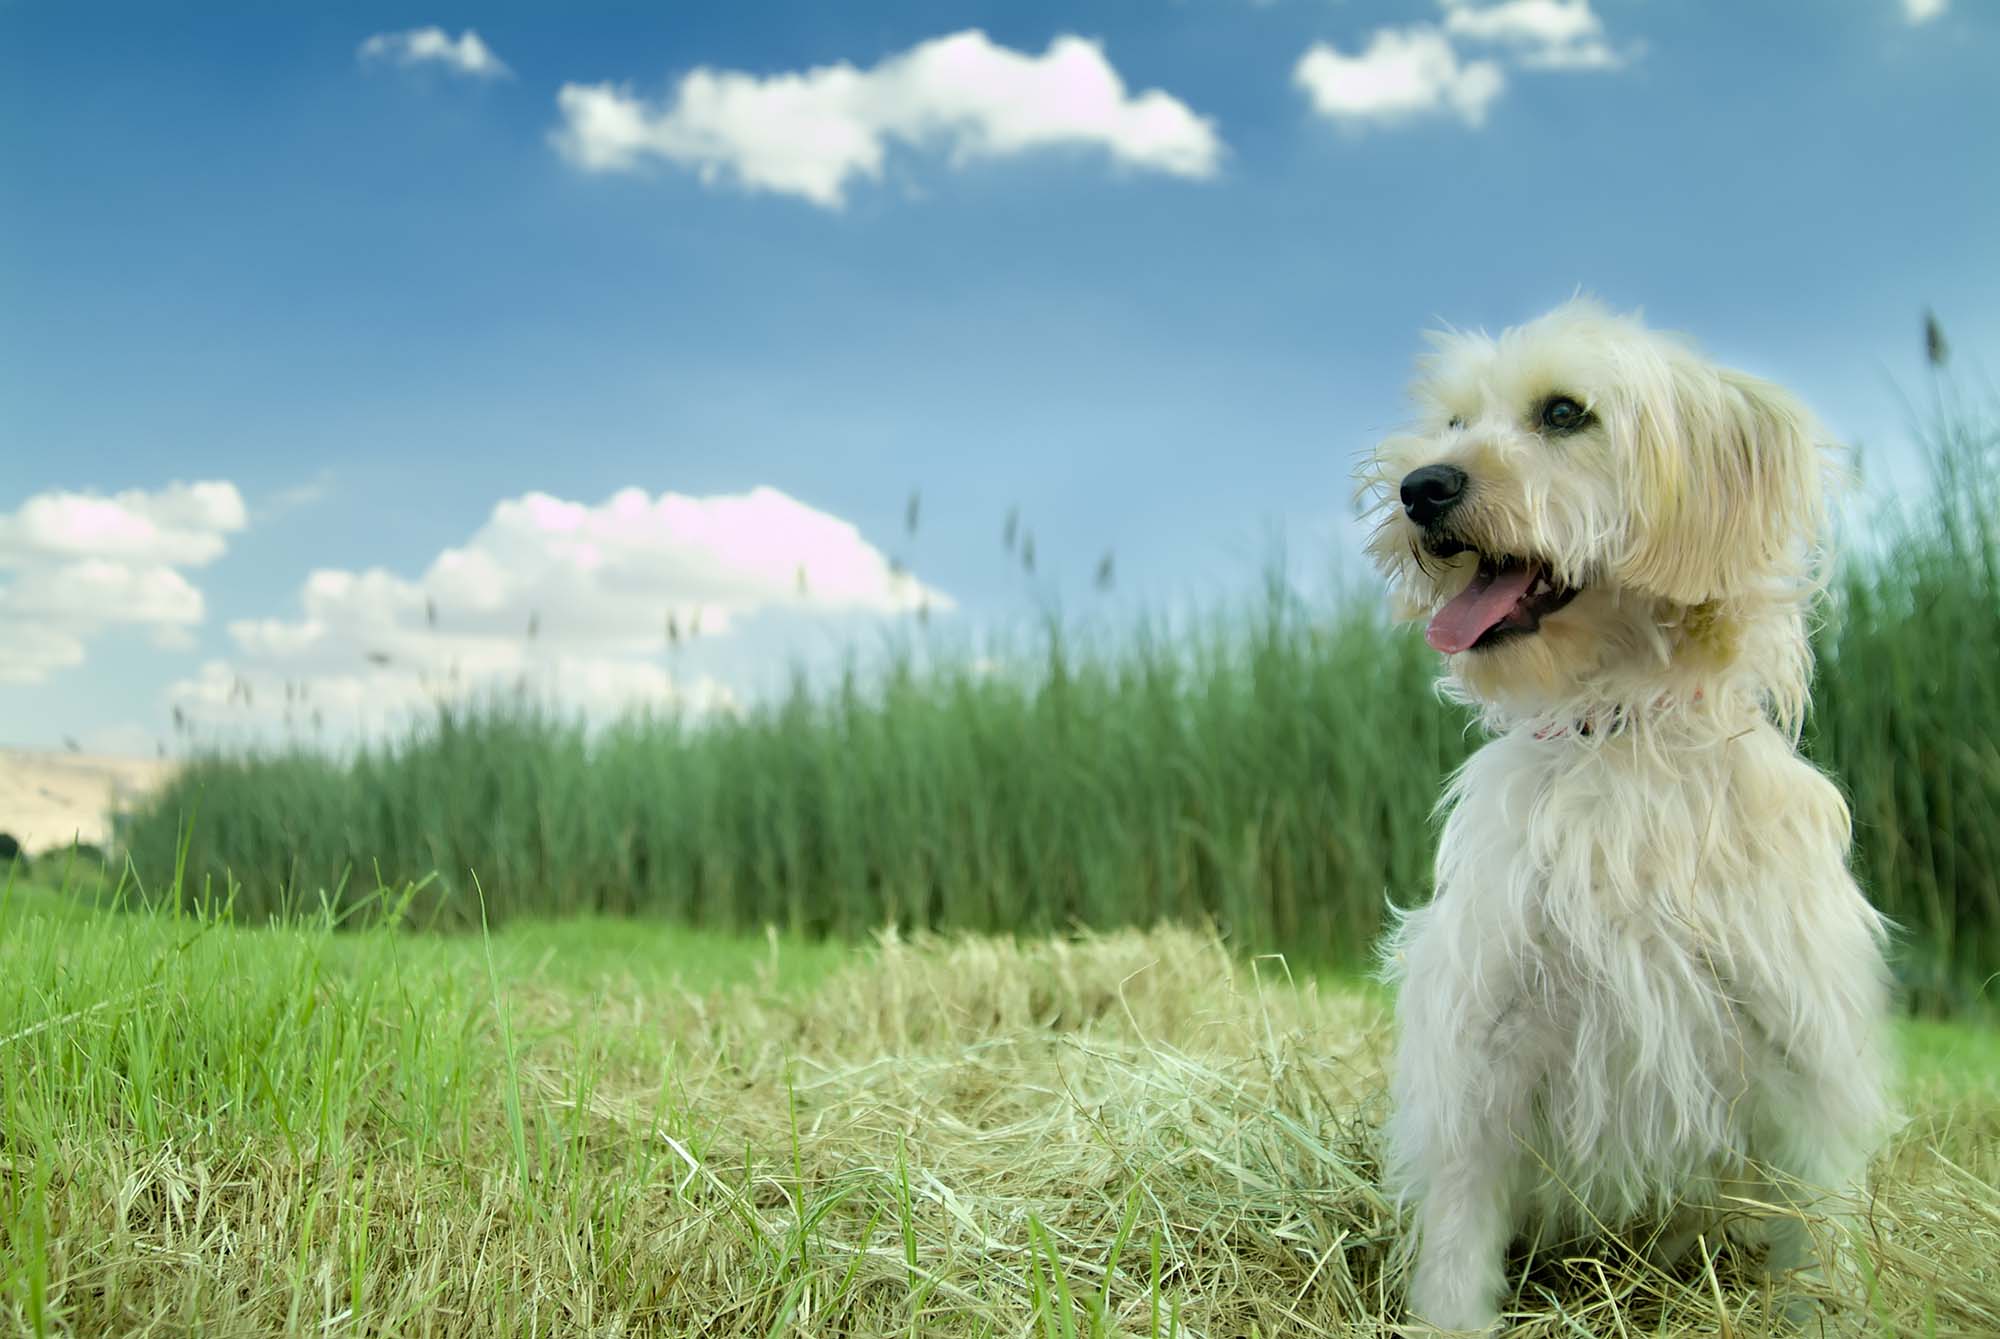 Small white dog sitting on grass outside.